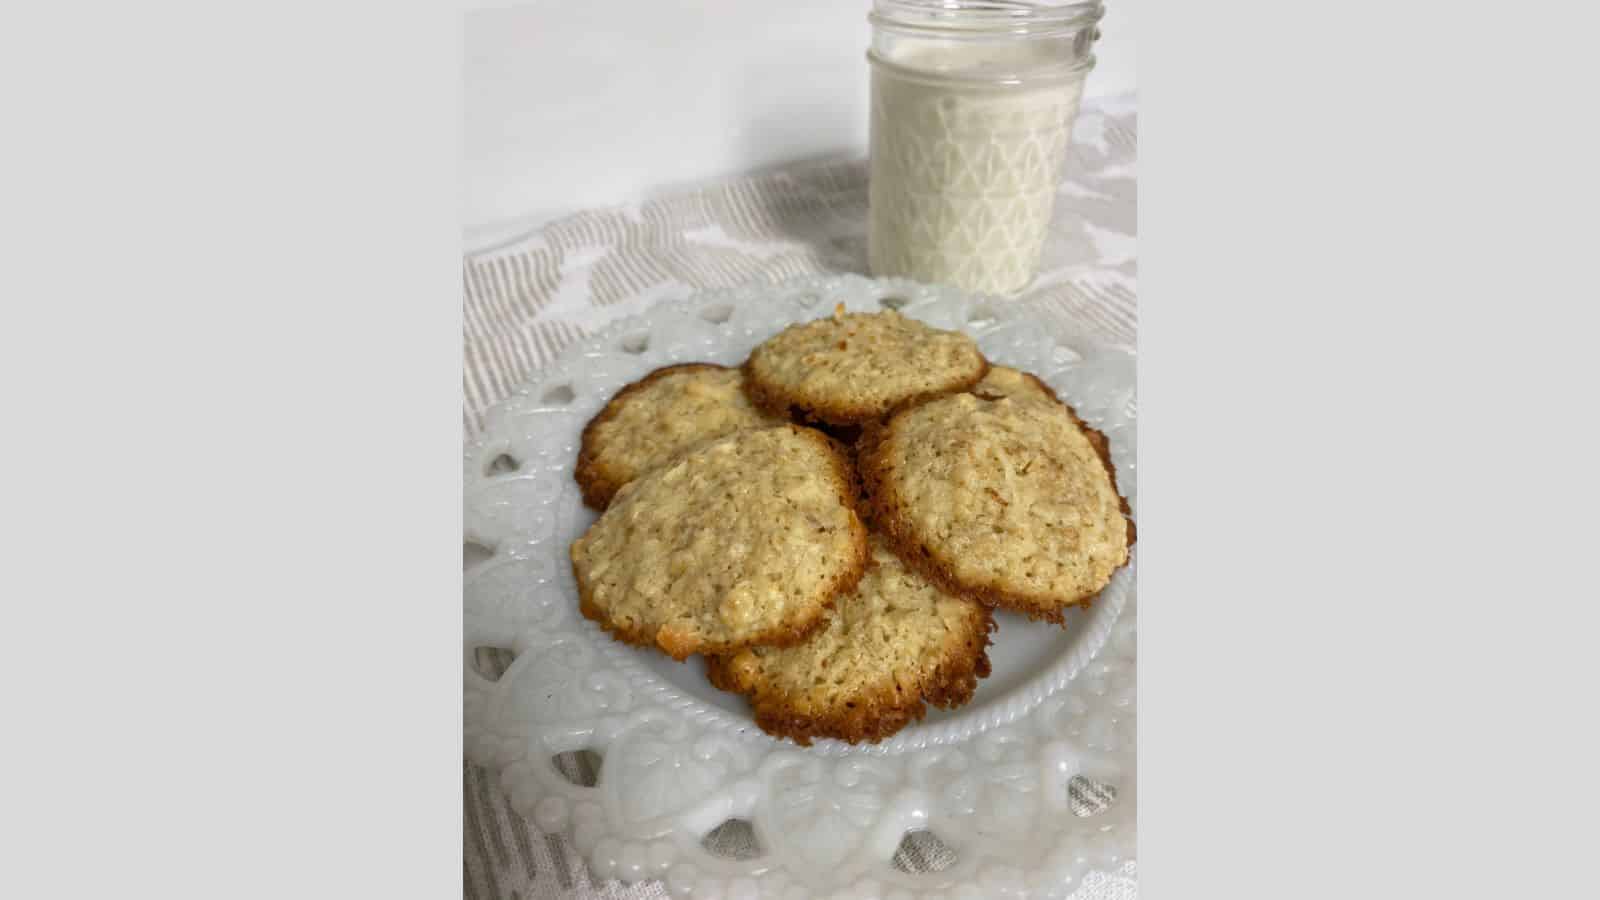 Lacy oatmeal cookies piled on white plate with glass of milk in background.